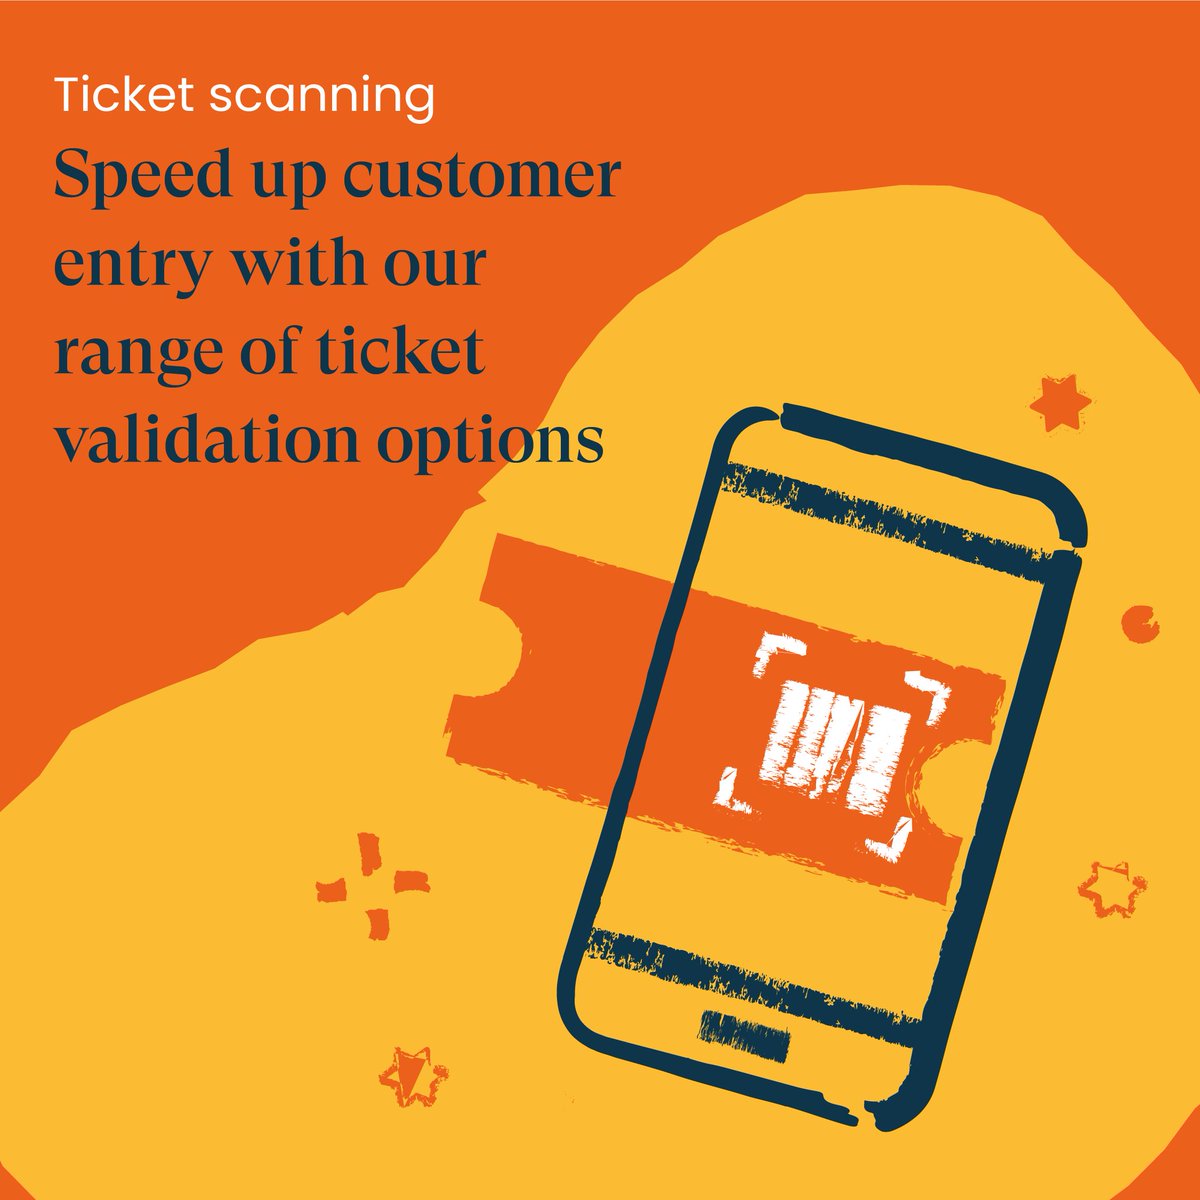 Are you scanning tickets for your events? Help keep track of customers by scanning their tickets upon entry!